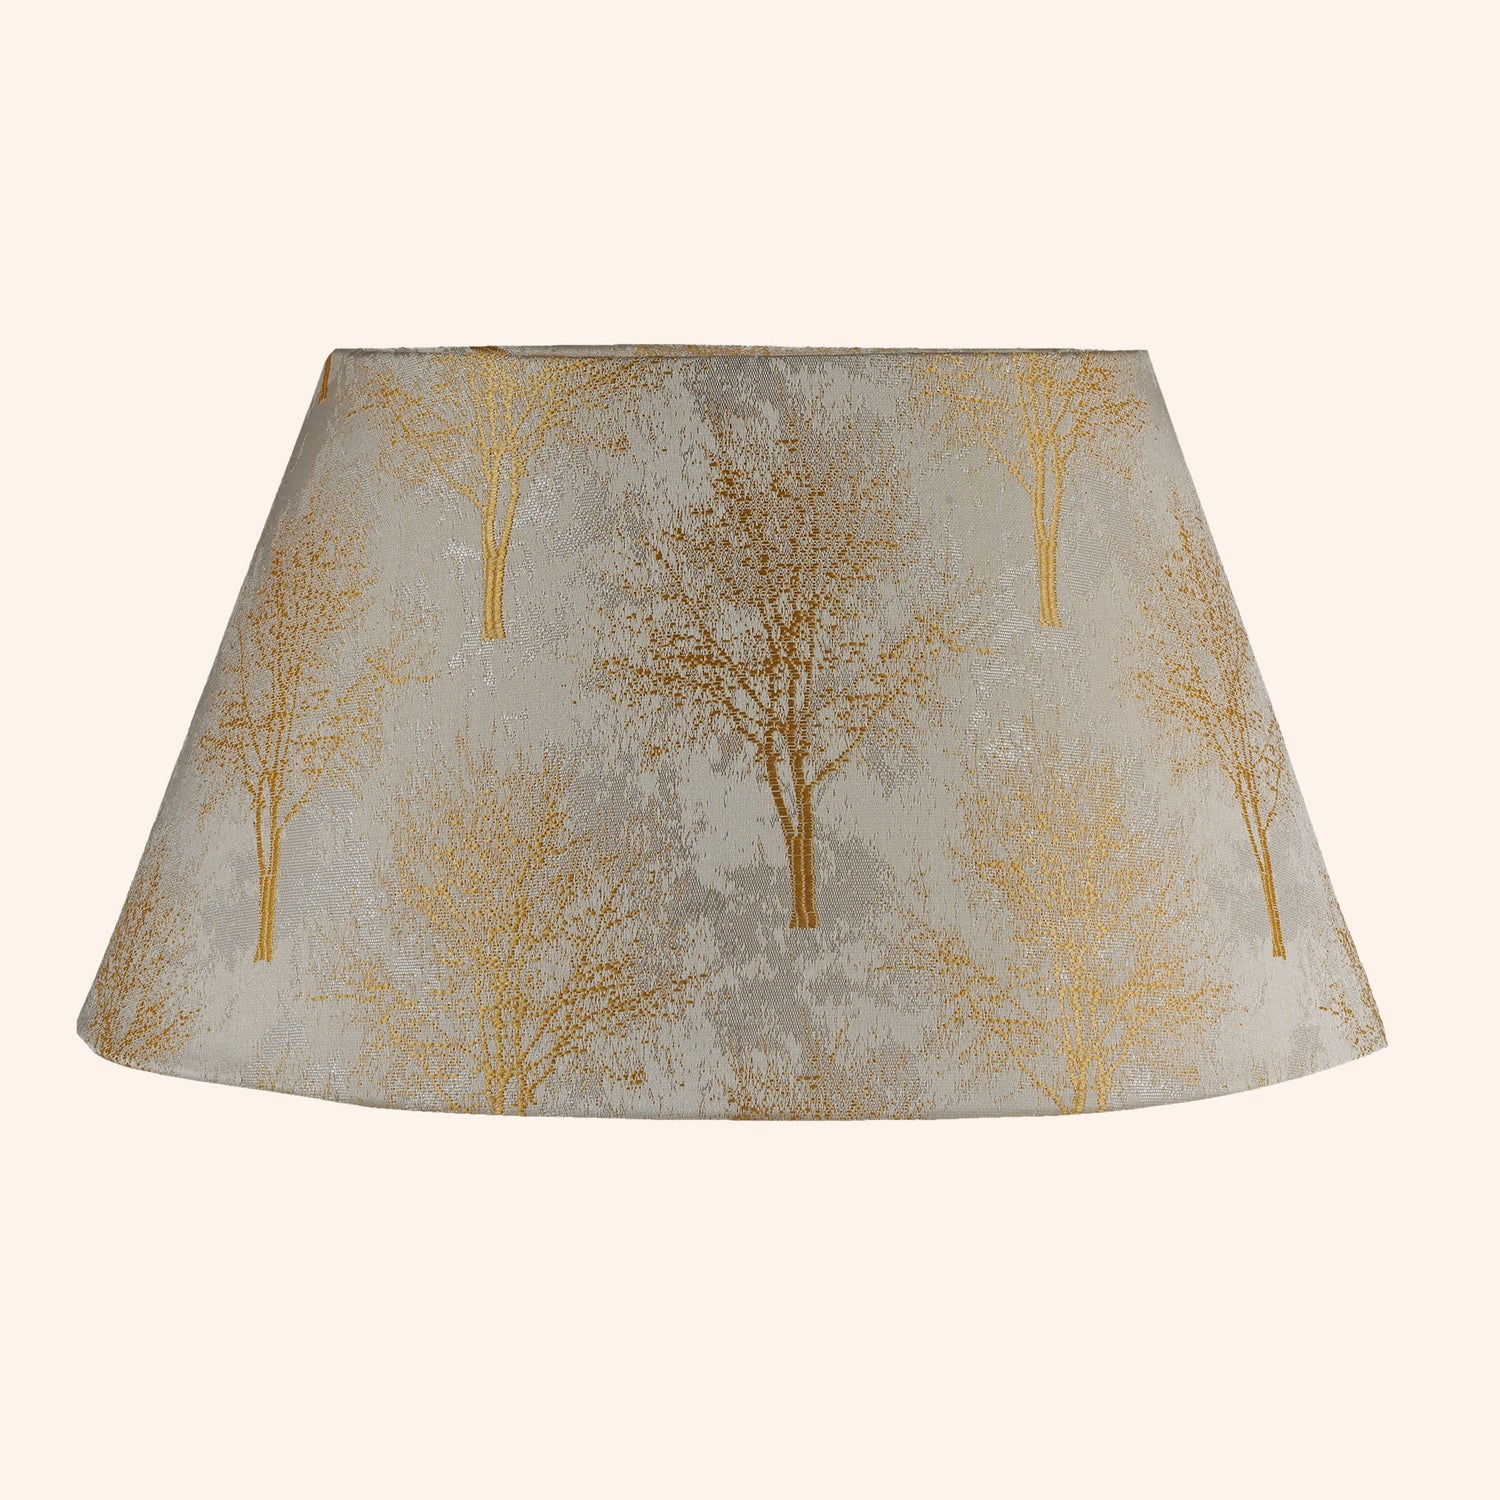 Empire shape lamp shade in yellow color.